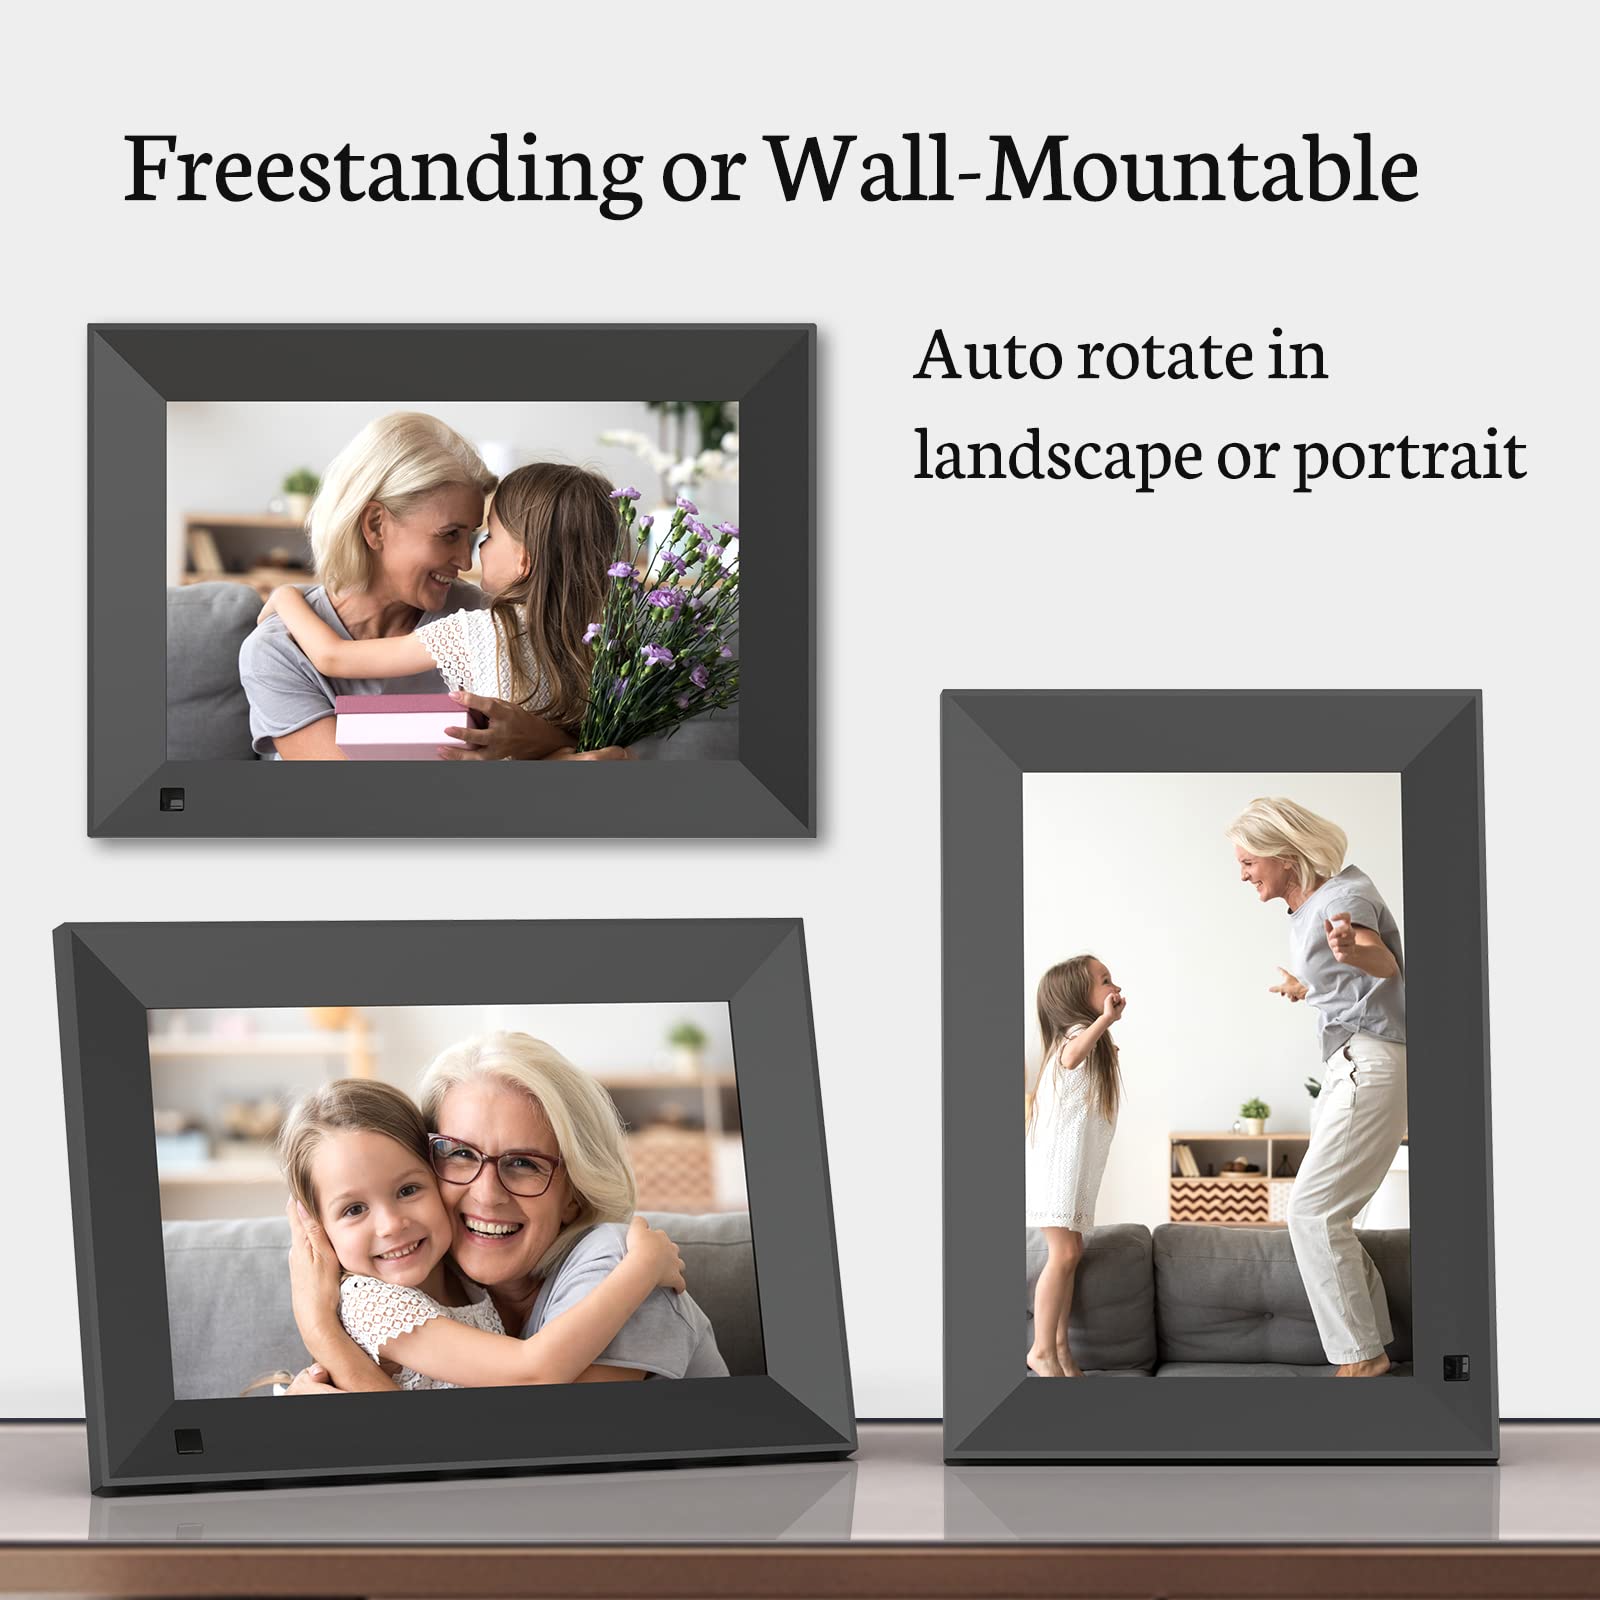 BSIMB 32GB WiFi Digital Picture Frame, Digital Photo Frame HD IPS Touch Screen Motion Sensor, Easy Setup to Upload Photos/Videos via App, Email, Auto-Rotate, Wall-Mounted, Gift for Grandparents